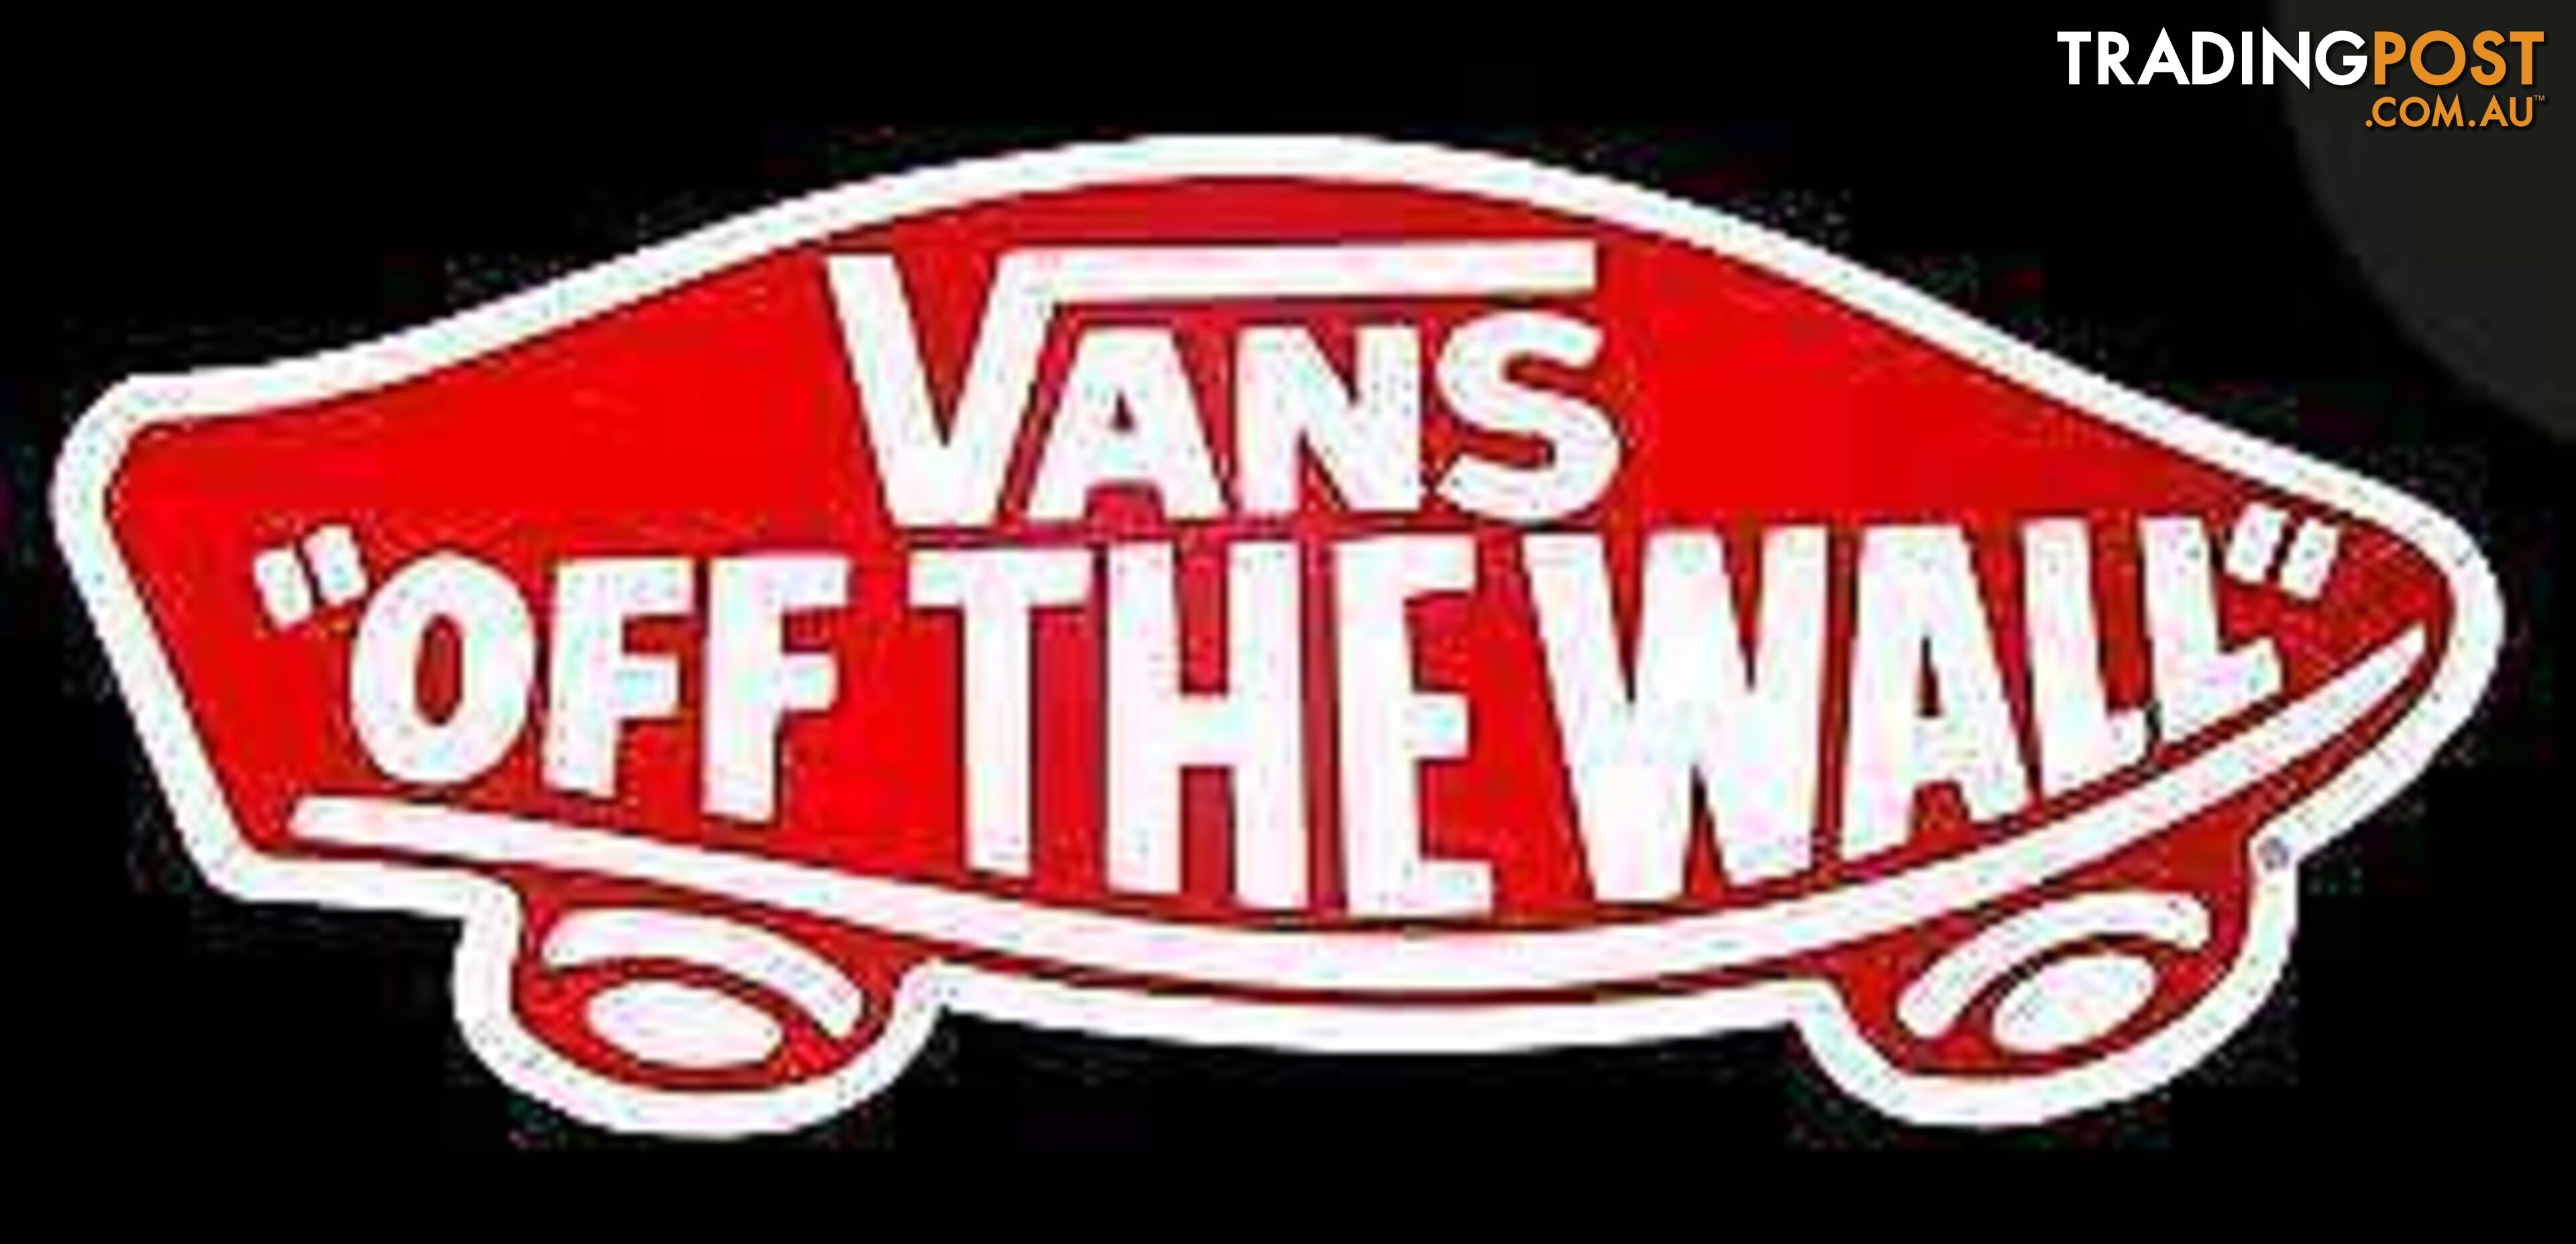 VANS OFF THE WALL SIZE US 11 MADE IN USA BRAND NEW call 047914295